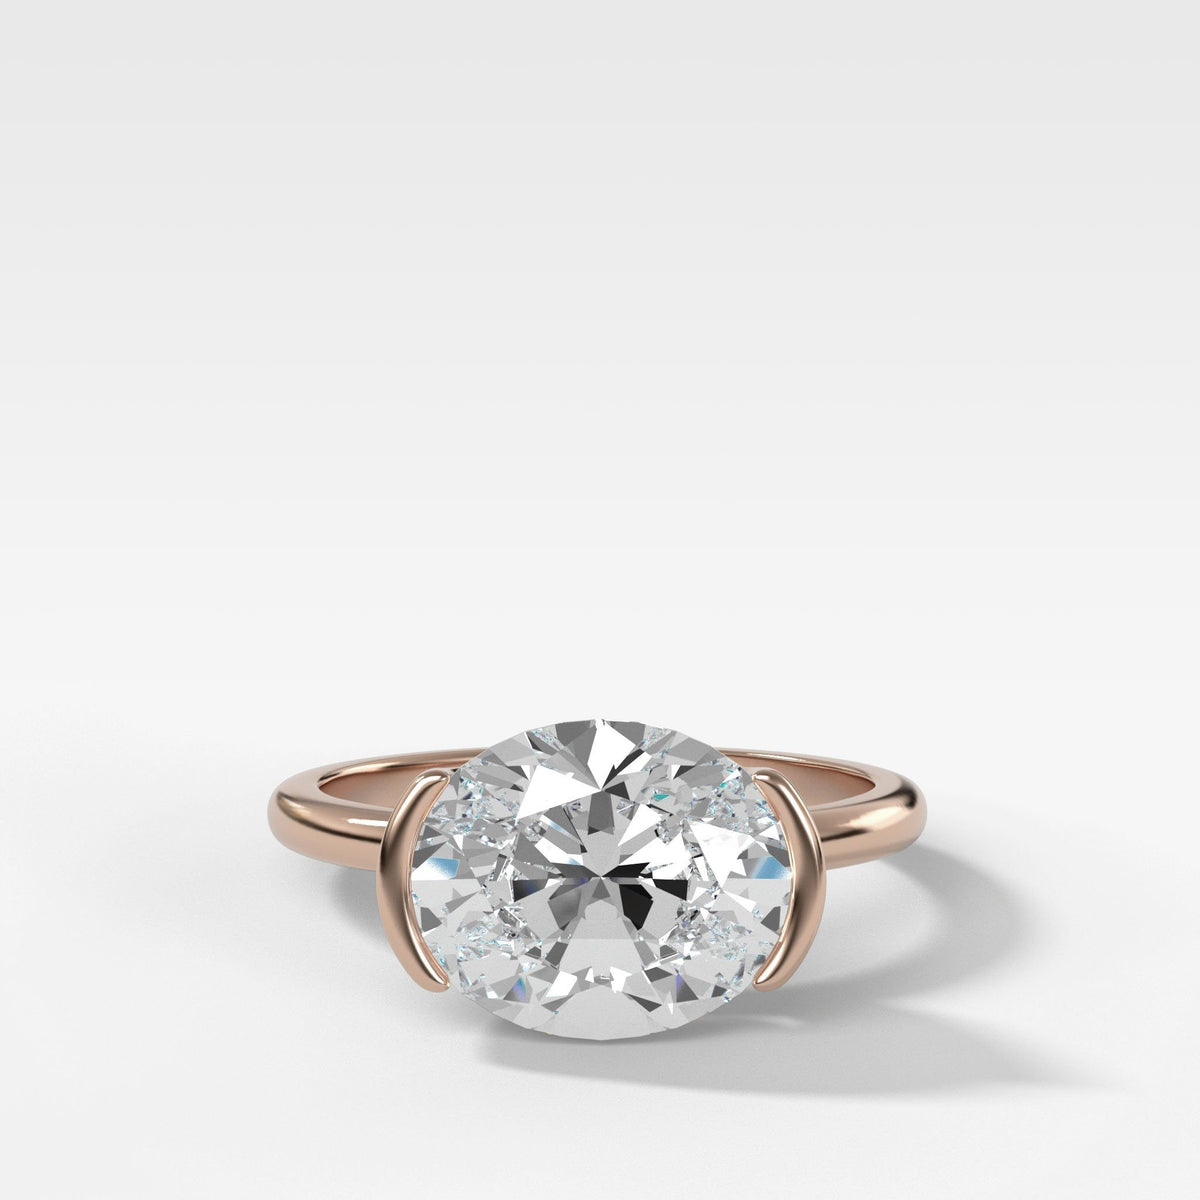 East West Half Bezel Solitaire Engagement Ring With Oval Cut in Rose Gold by Good Stone